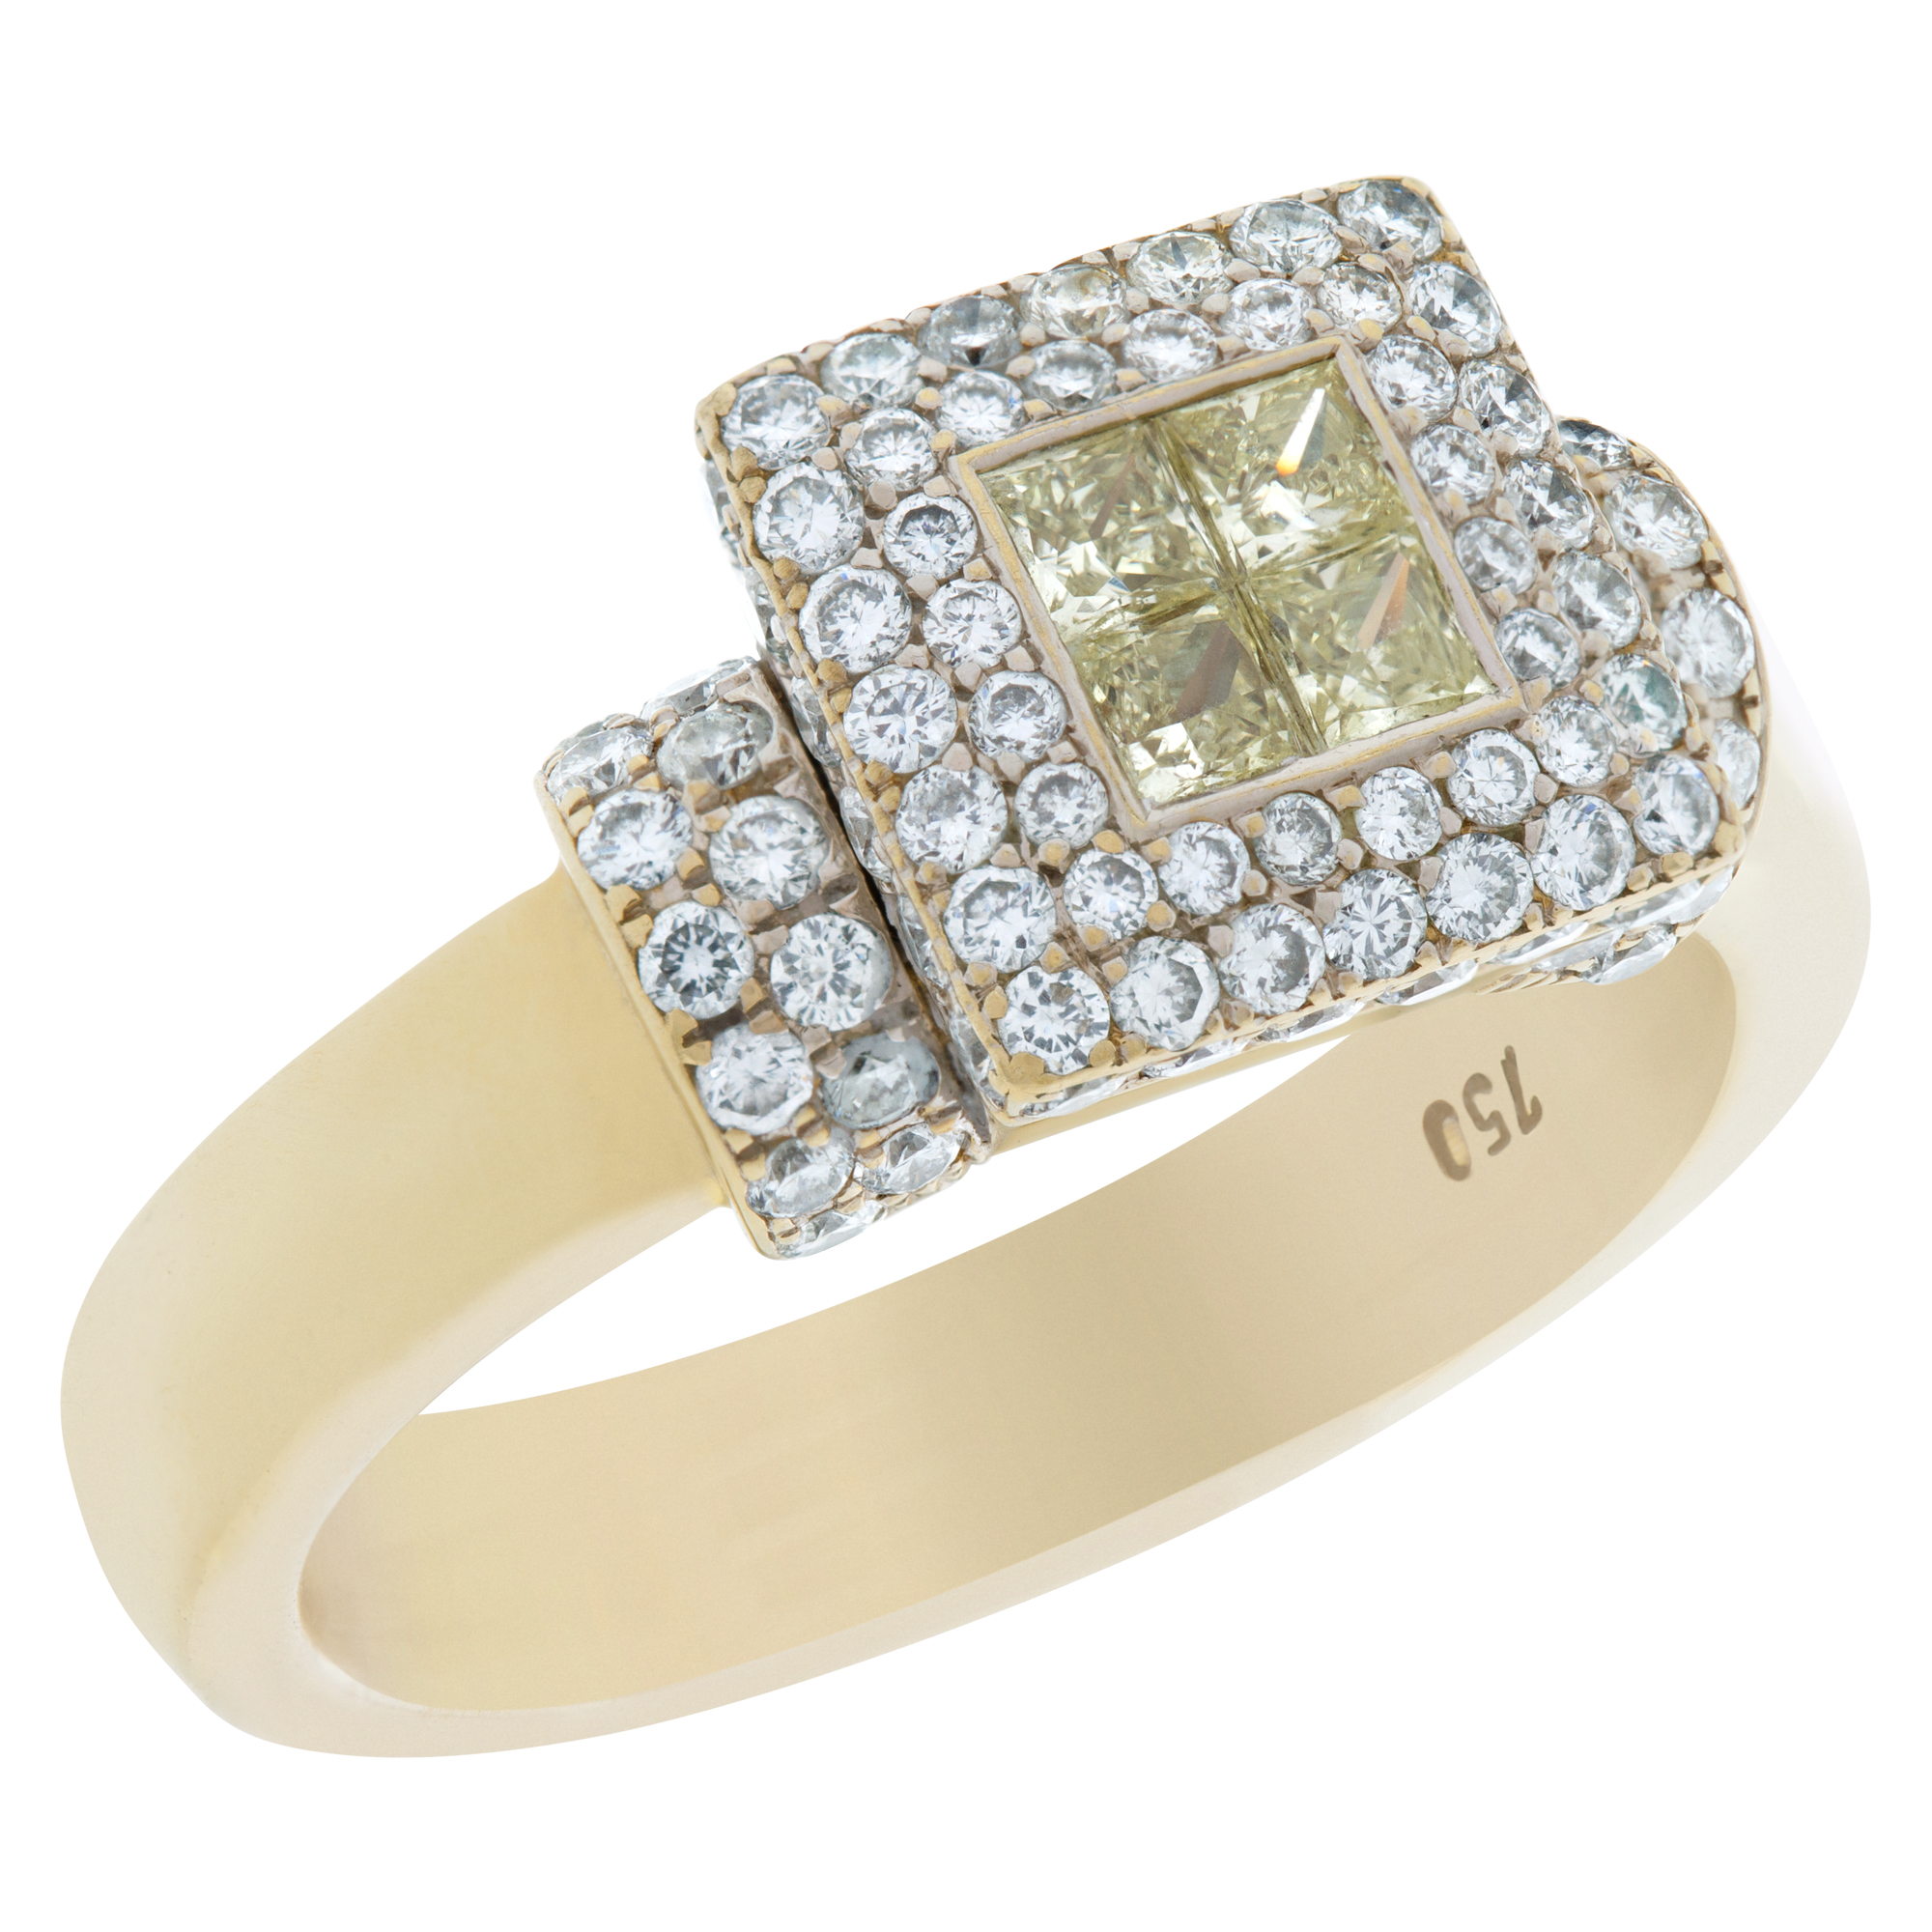 White & Yellow Diamond Ring In 18k White Gold. Approx 1 Ct In Diamonds. Size 6 1/4. image 3